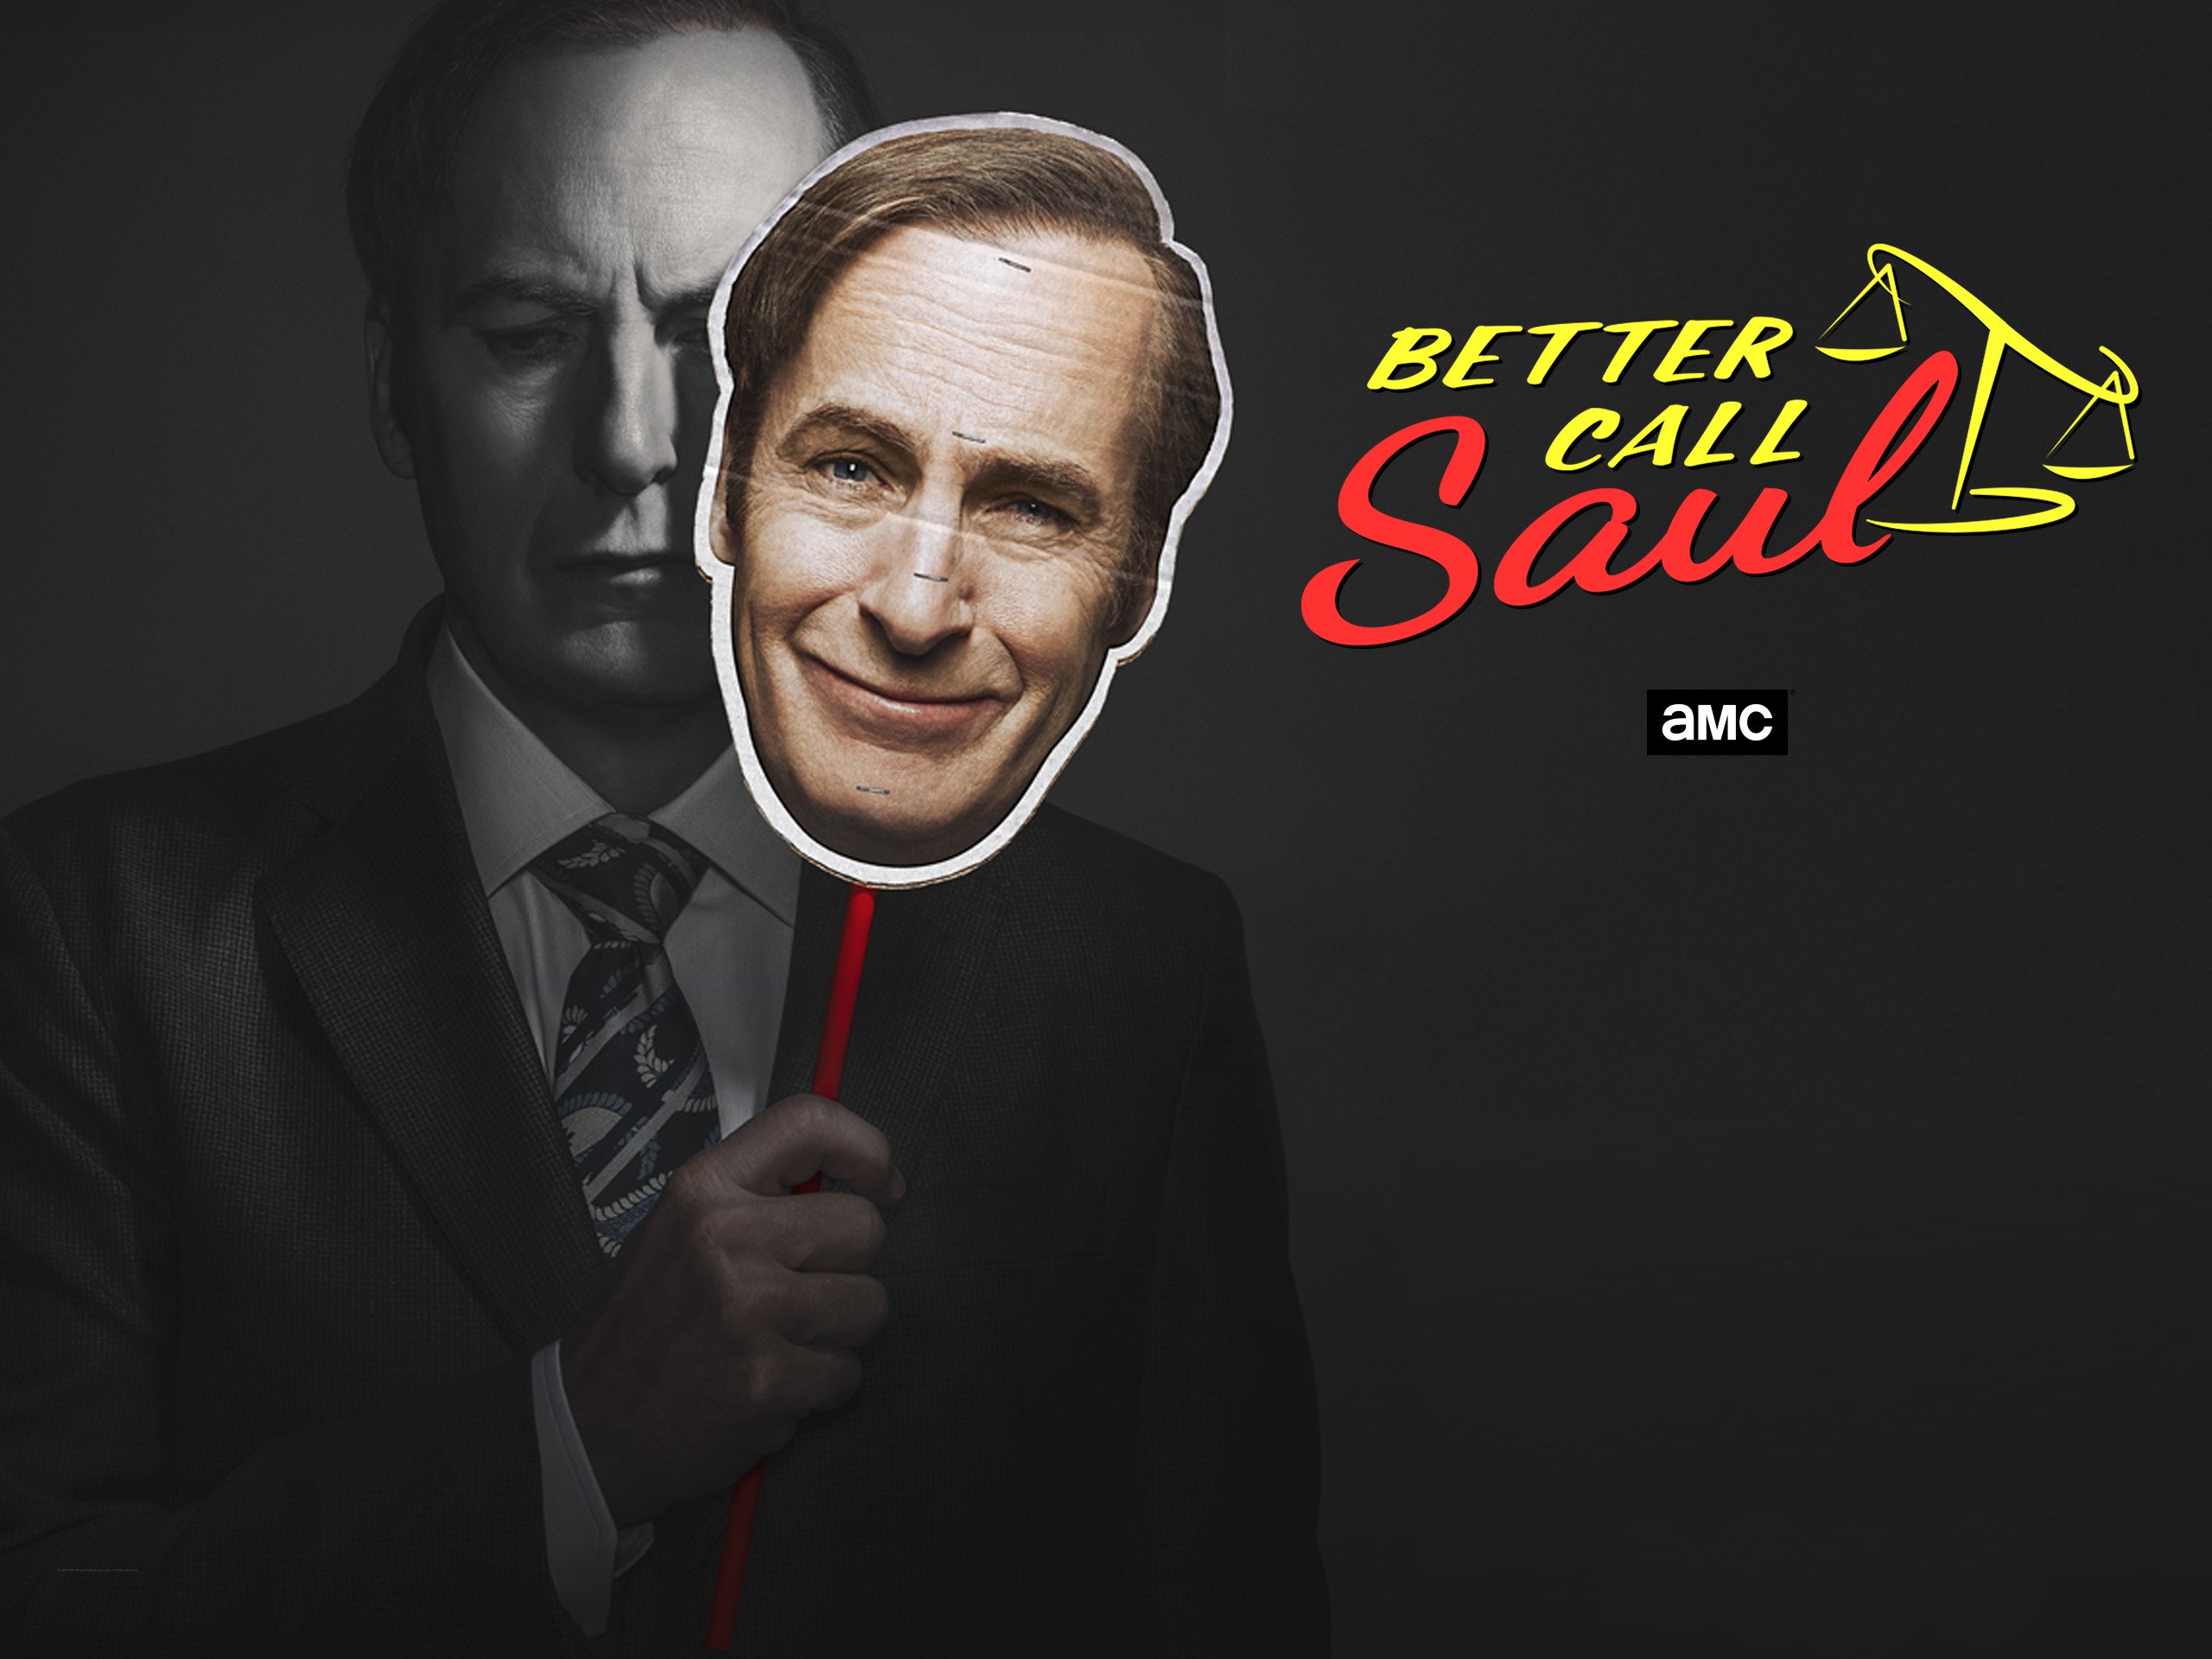 Better Call Saul Season 5: With Fans Going Crazy For The New Season, Here's When Season 5 Will Be Released - The Global Coverage